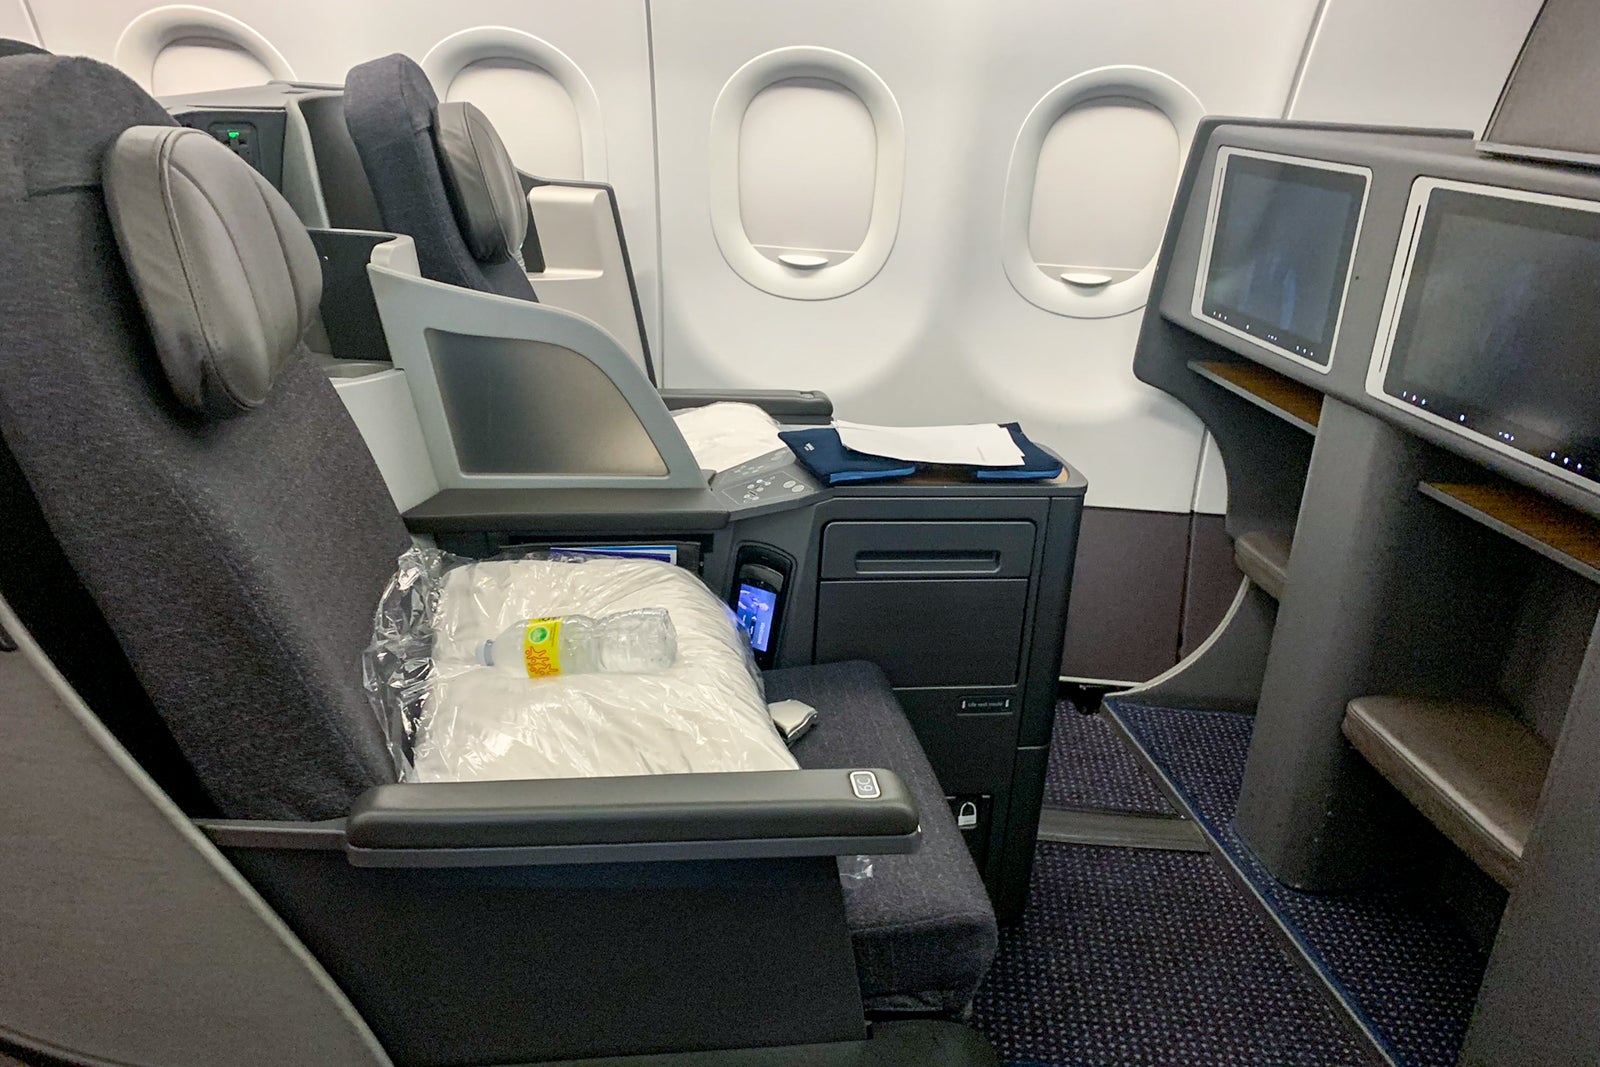 American Airlines business class on an A321